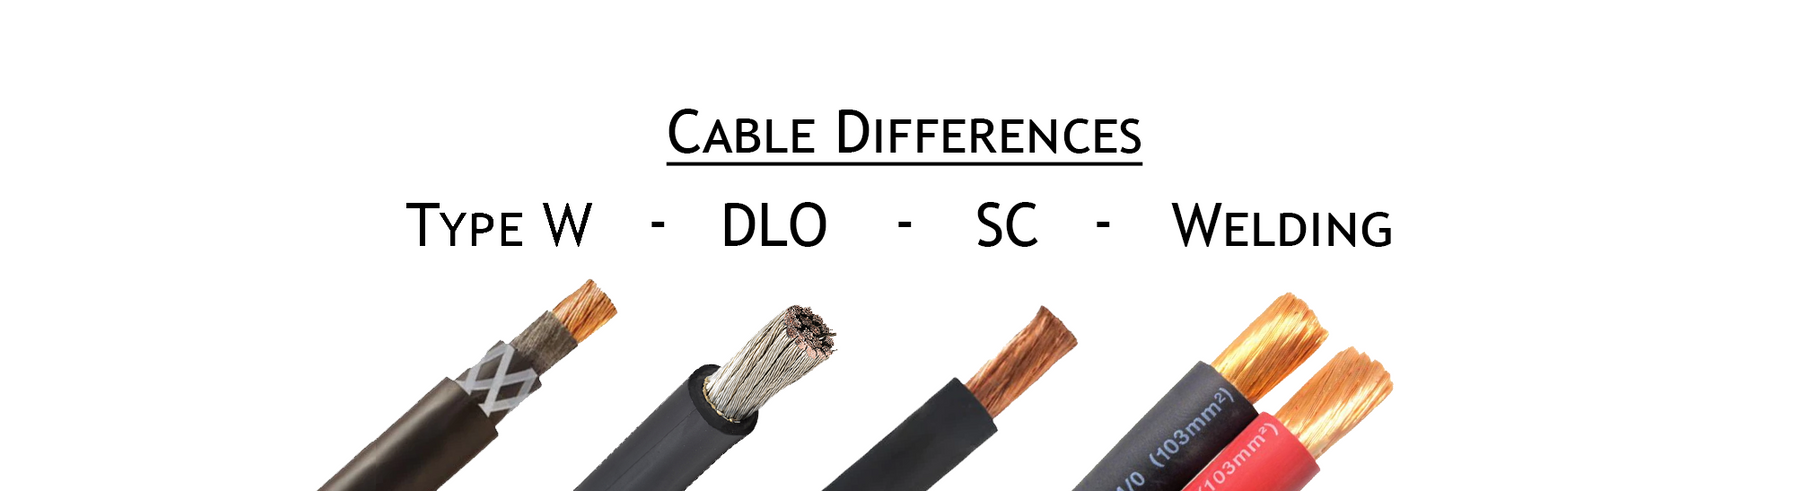 Cable Differences: Which One Meets Your Needs?